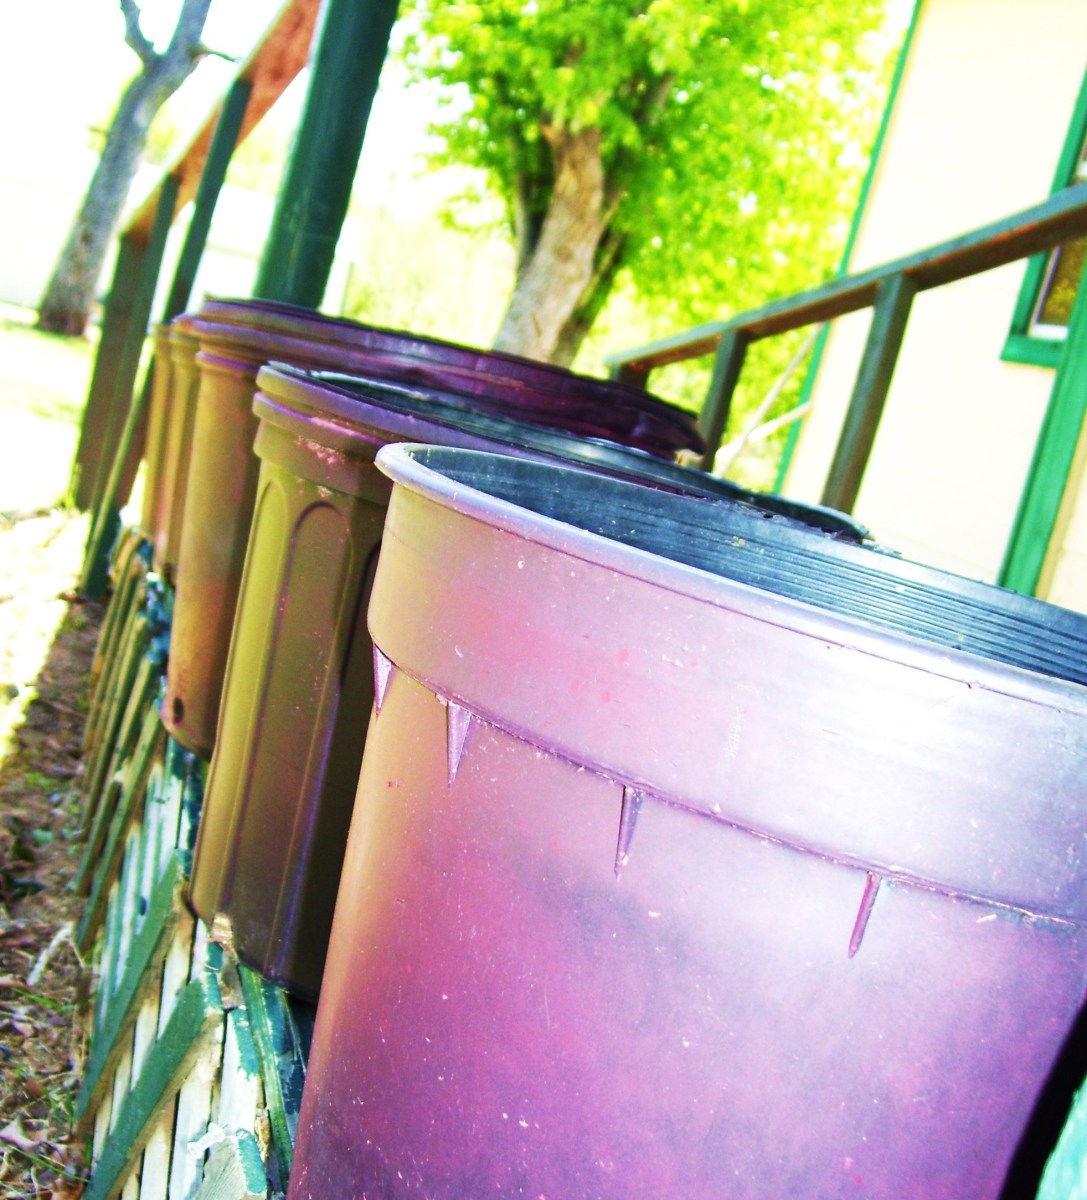 Pink pots all lined up and waiting for marigolds.